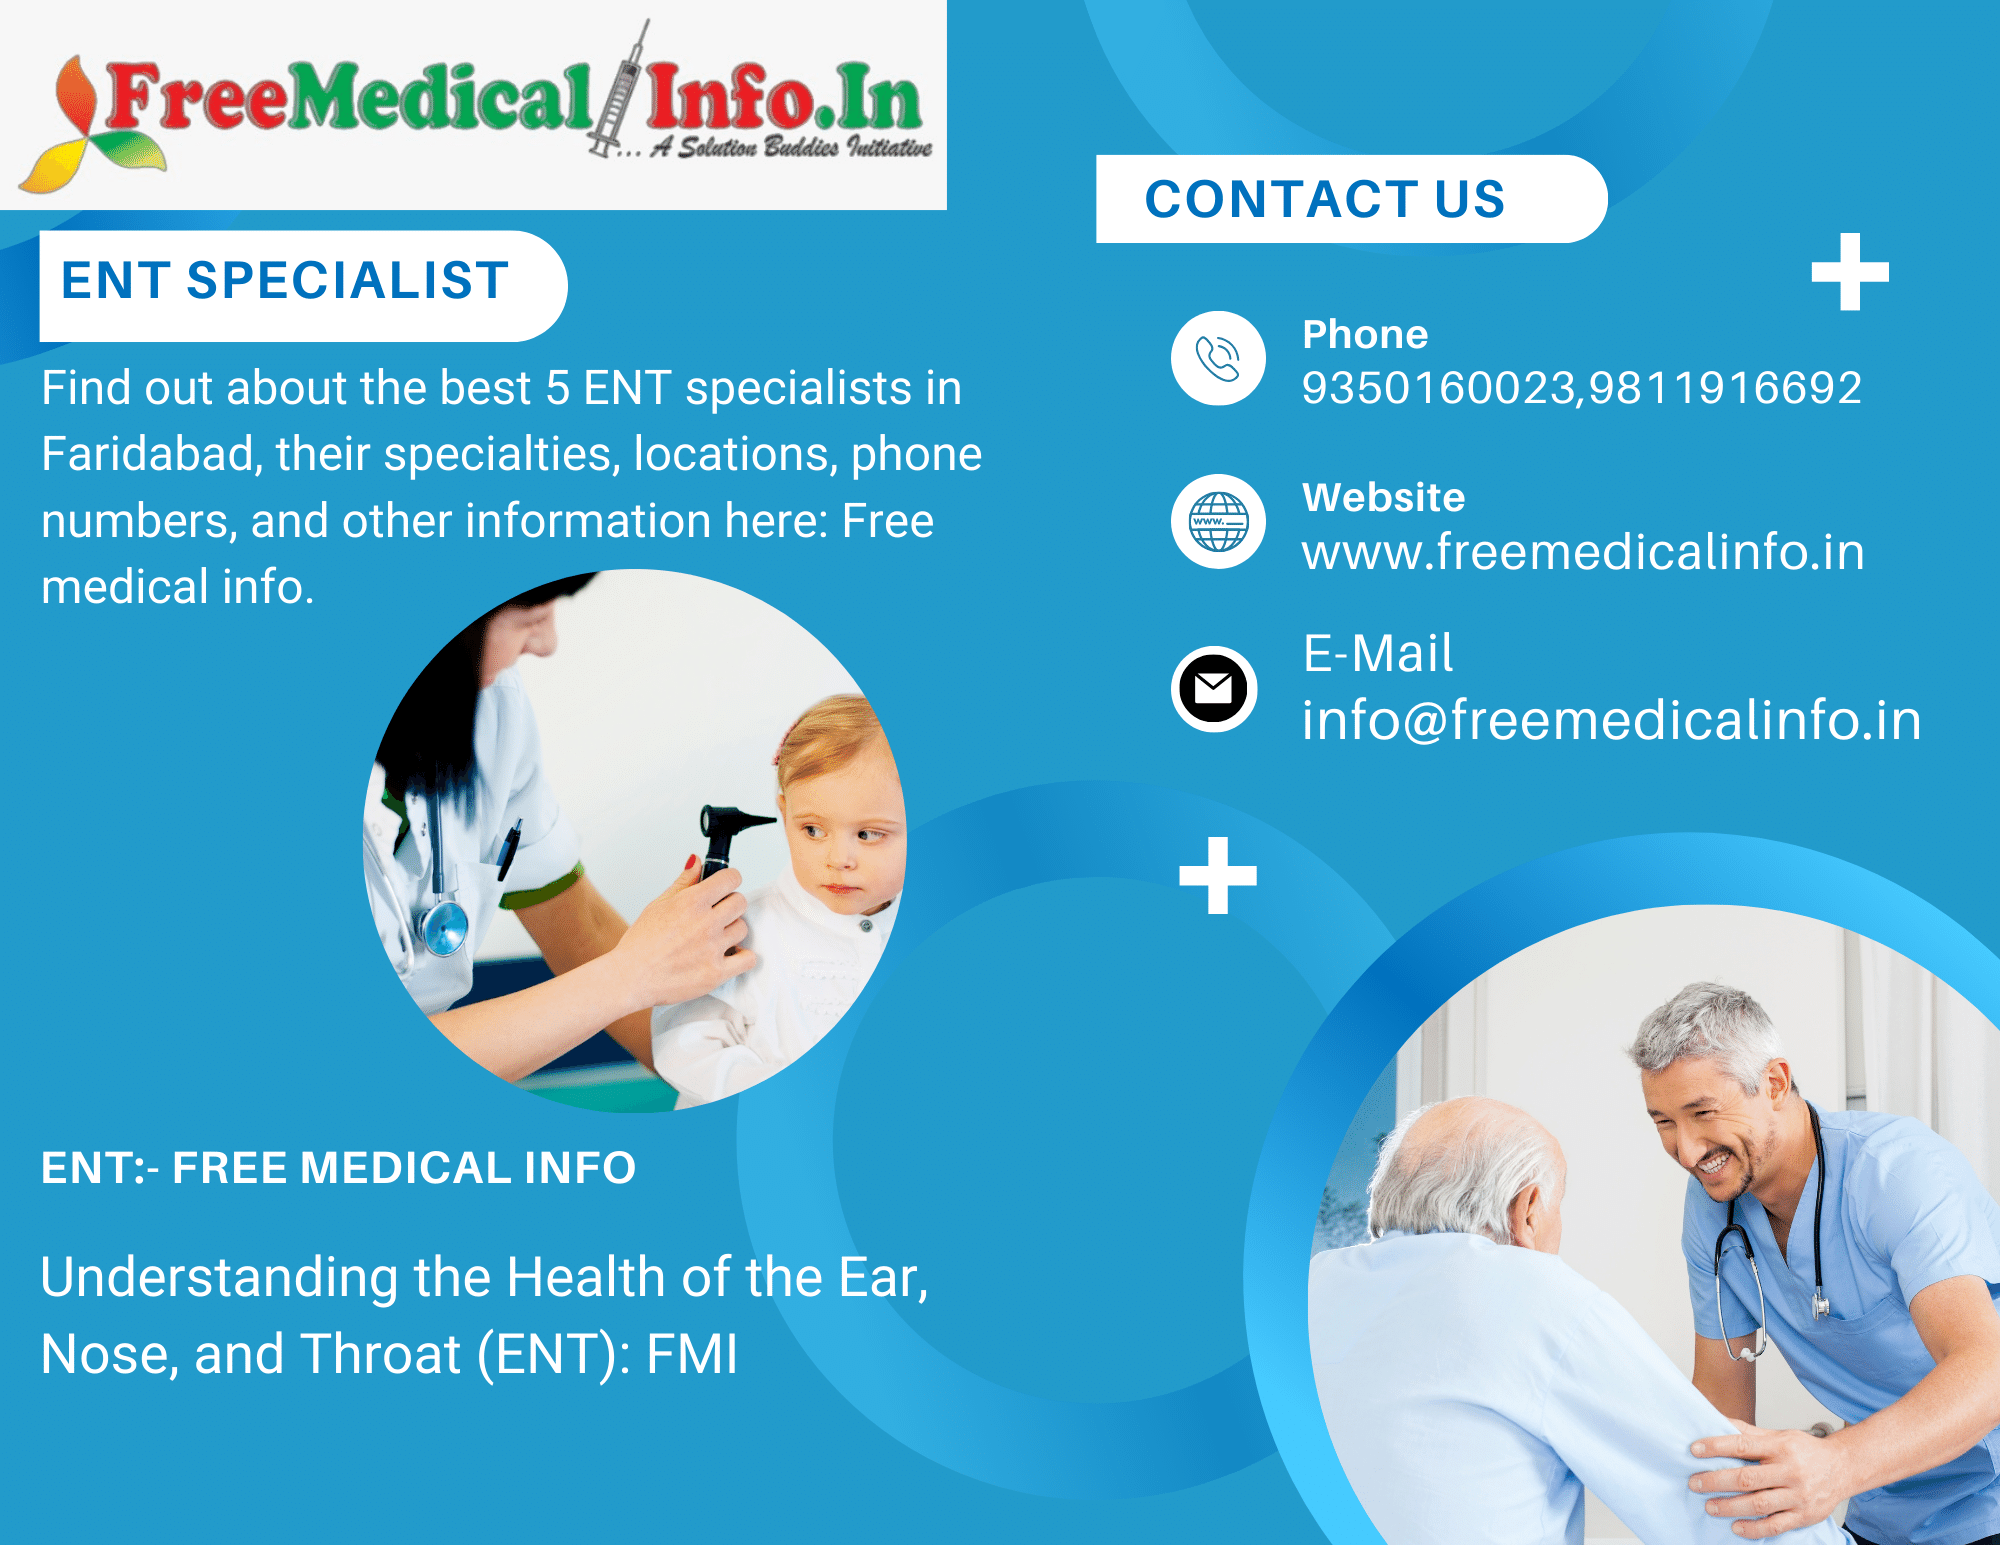 Information about the top 7 ENT specialists in Faridabad, including their address, phone number, and what makes them unique